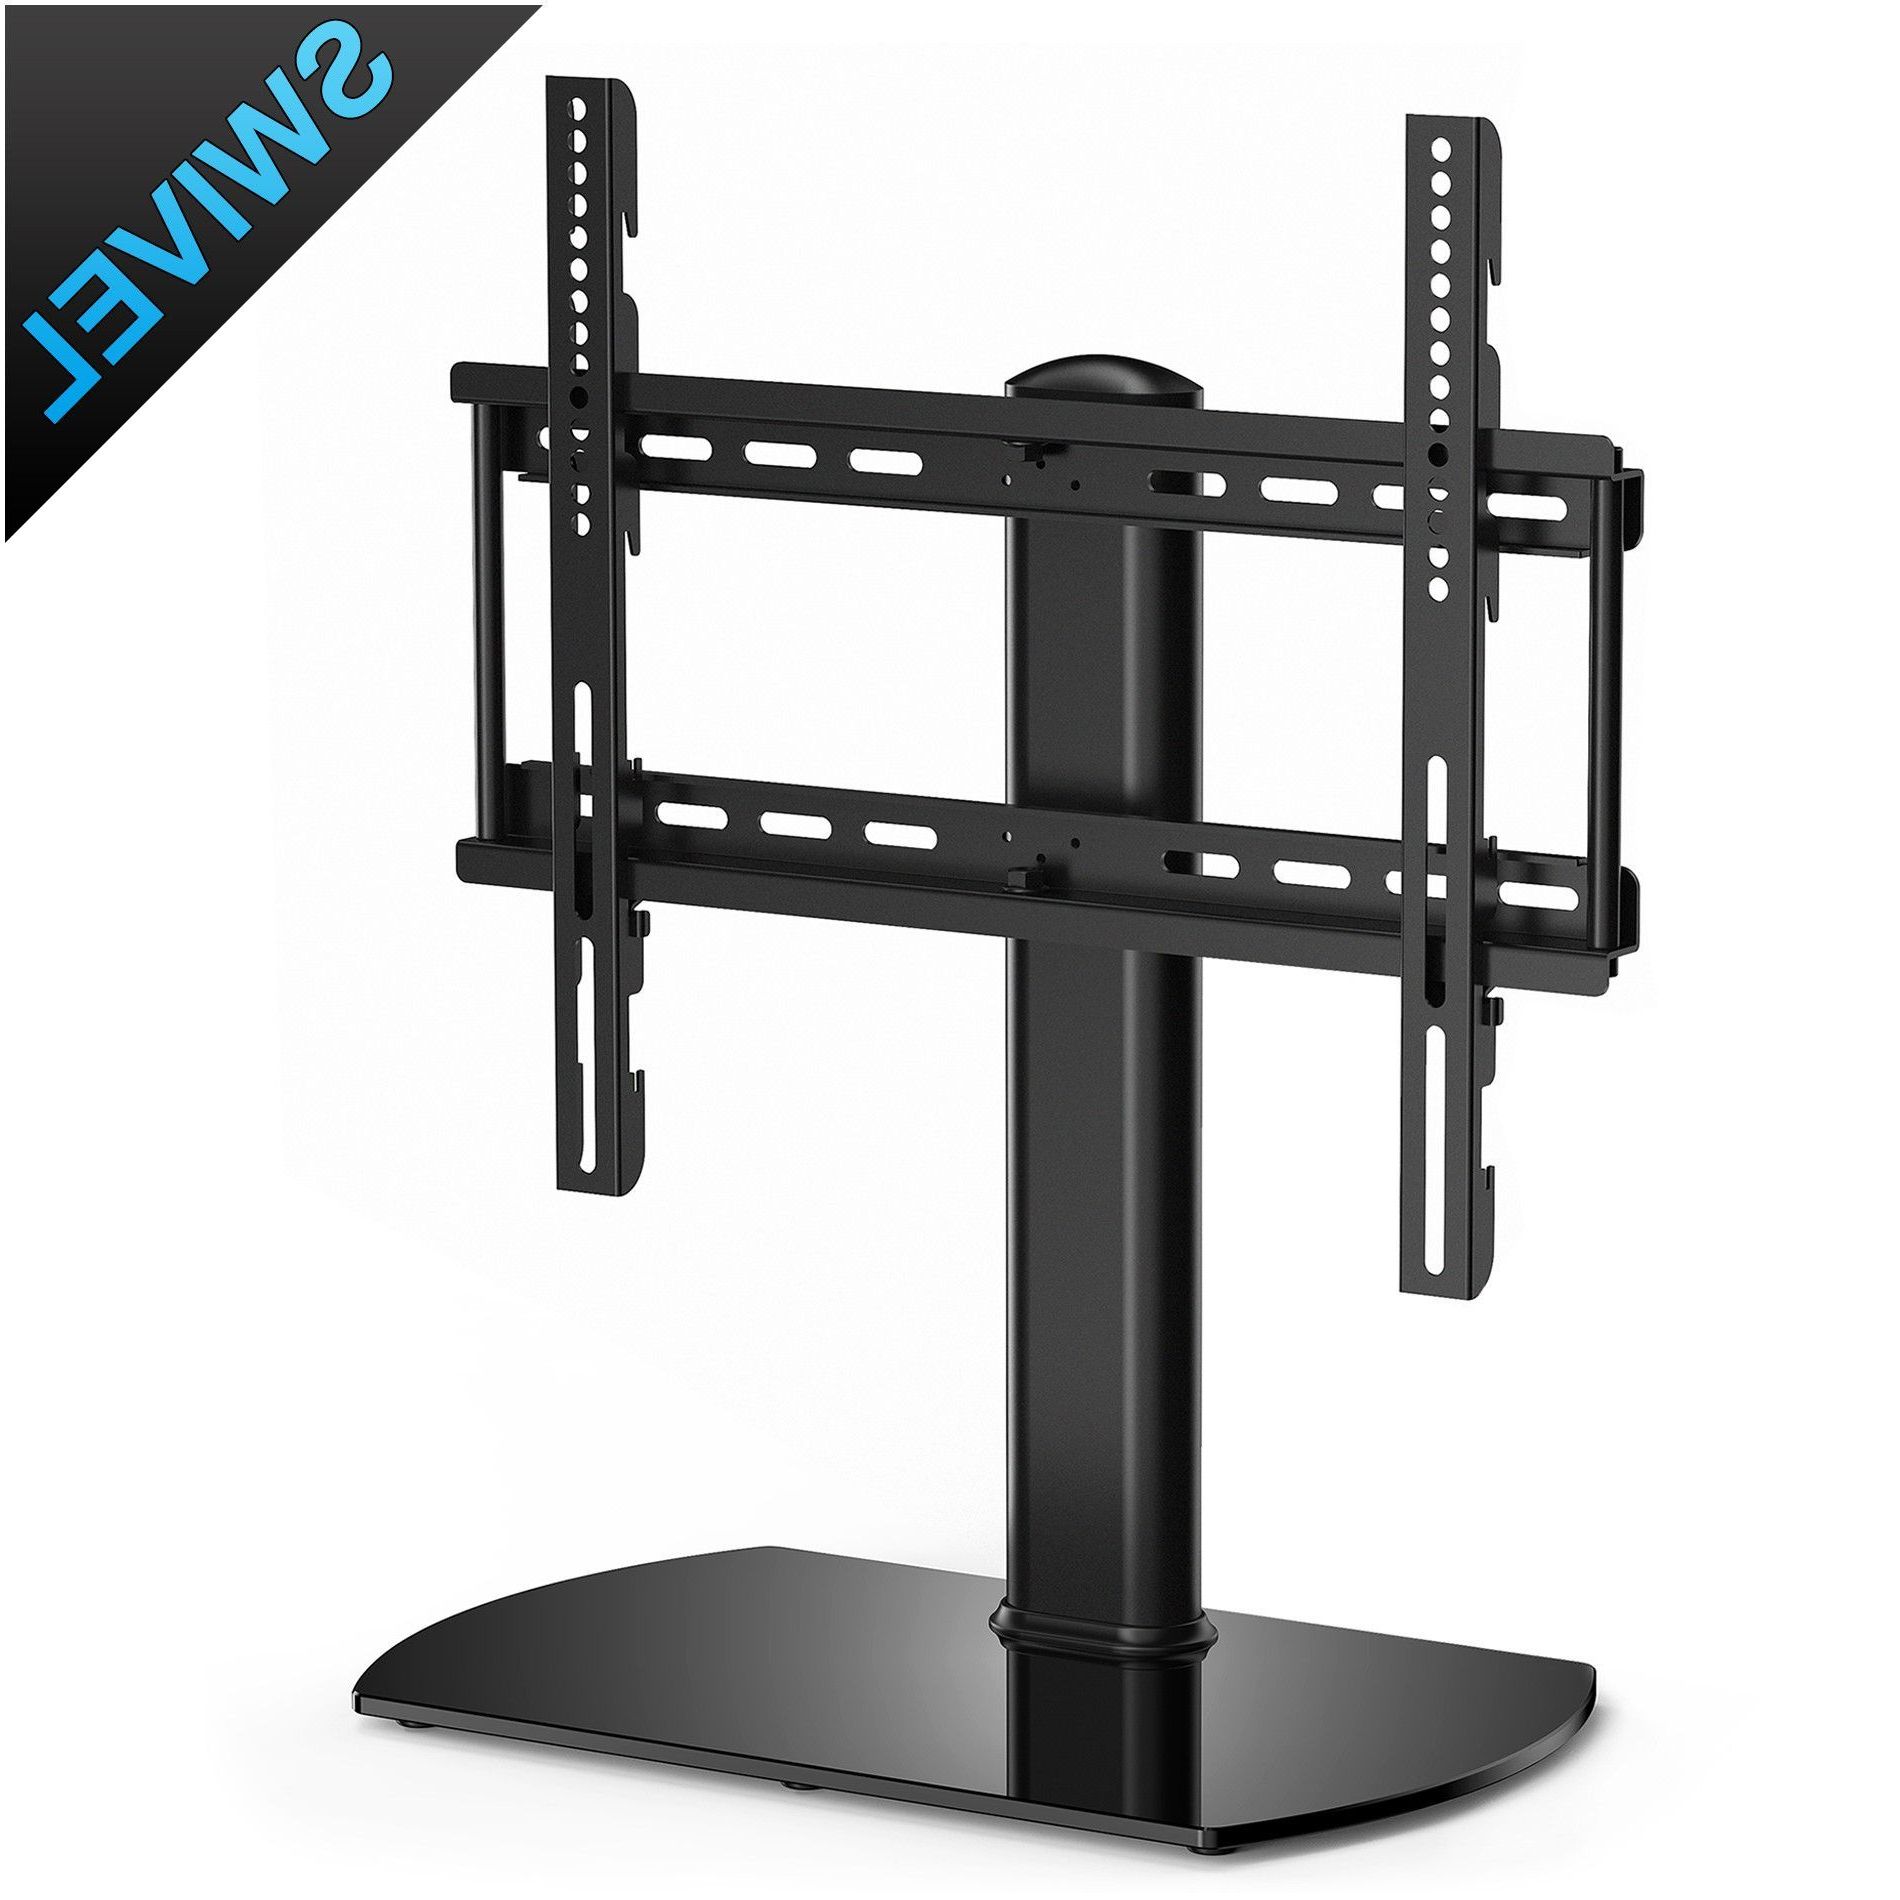 Fitueyes Universal Tabletop Tv Stand Pedestal Base Wall Within Modern Black Universal Tabletop Tv Stands (View 3 of 20)